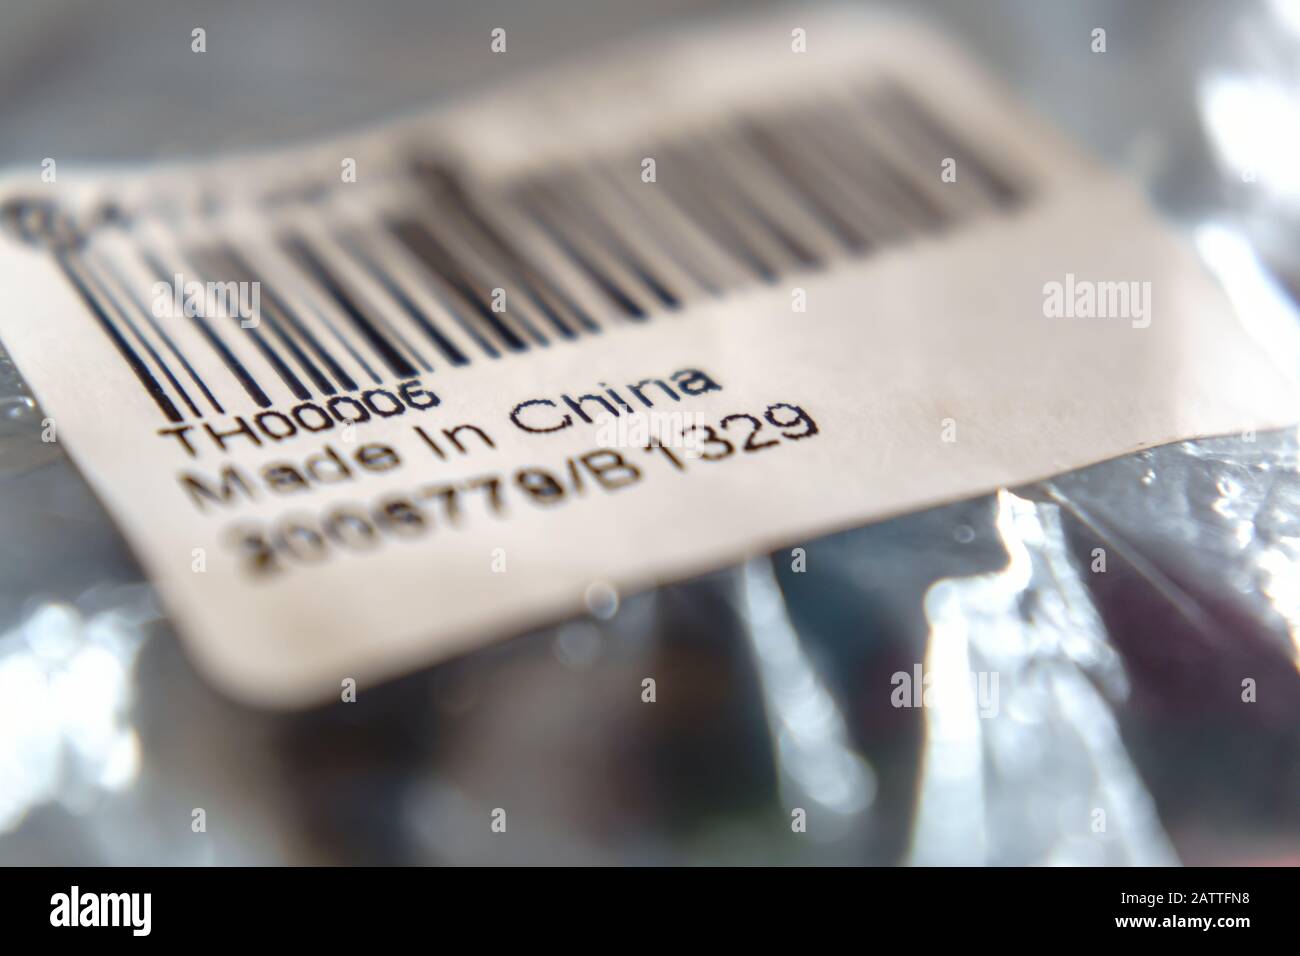 'Made in China' on a product label Stock Photo